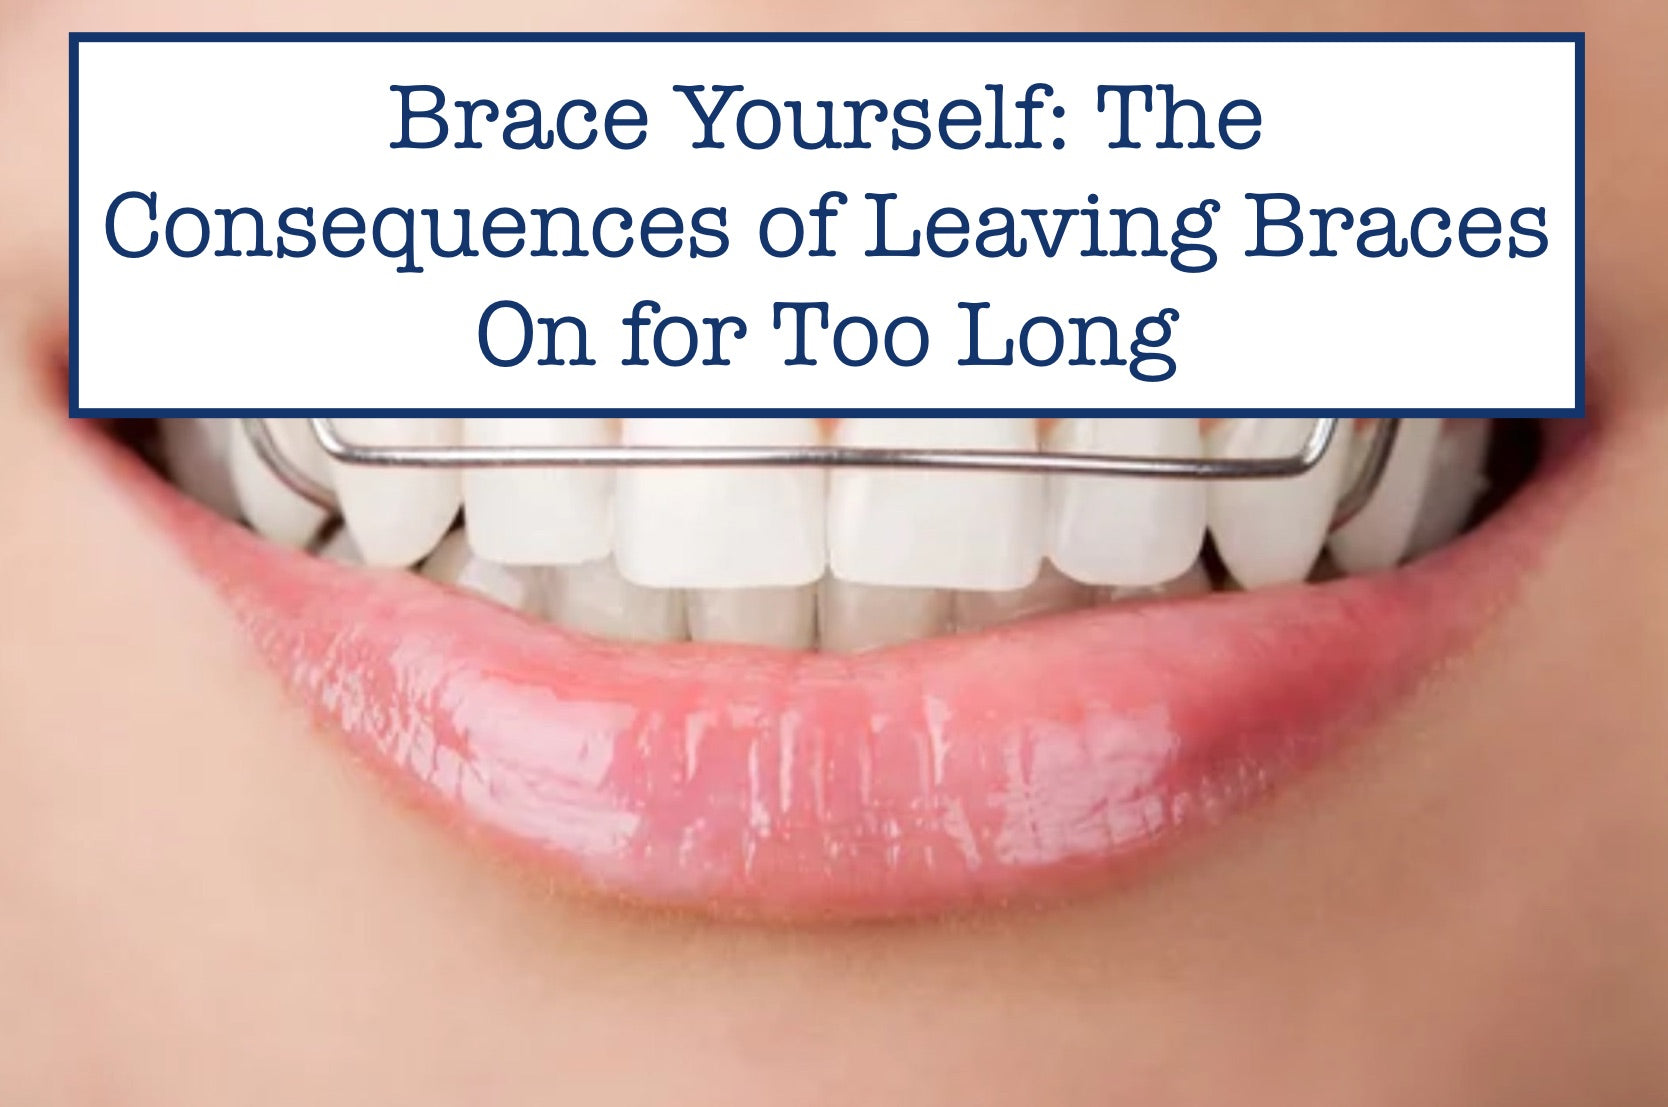 Brace Yourself: The Consequences of Leaving Braces On for Too Long